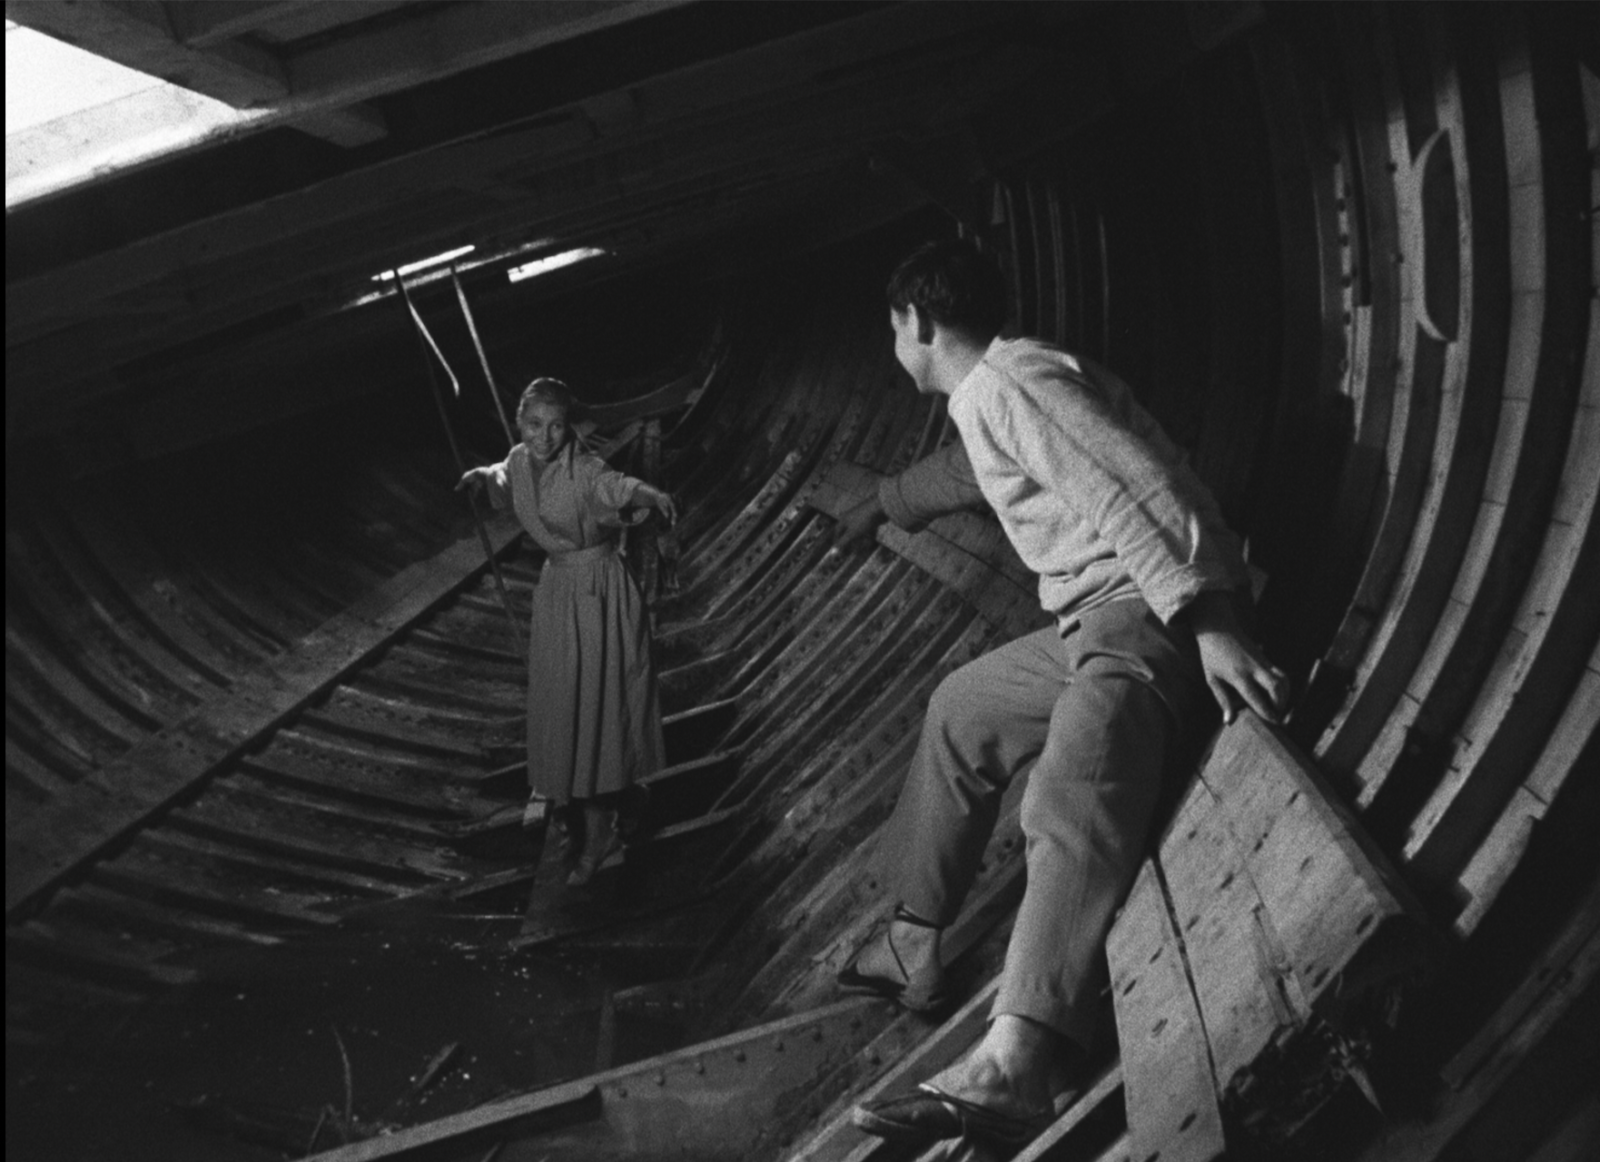 In a still from Agnès Varda’s 1955 black-and-white film La Pointe Courte, a young couple is inside the beached remains of an old hull of a ship. The woman balances herself on the sloping bottom. The man has anchored himself against the side wall and is reaching out to her.